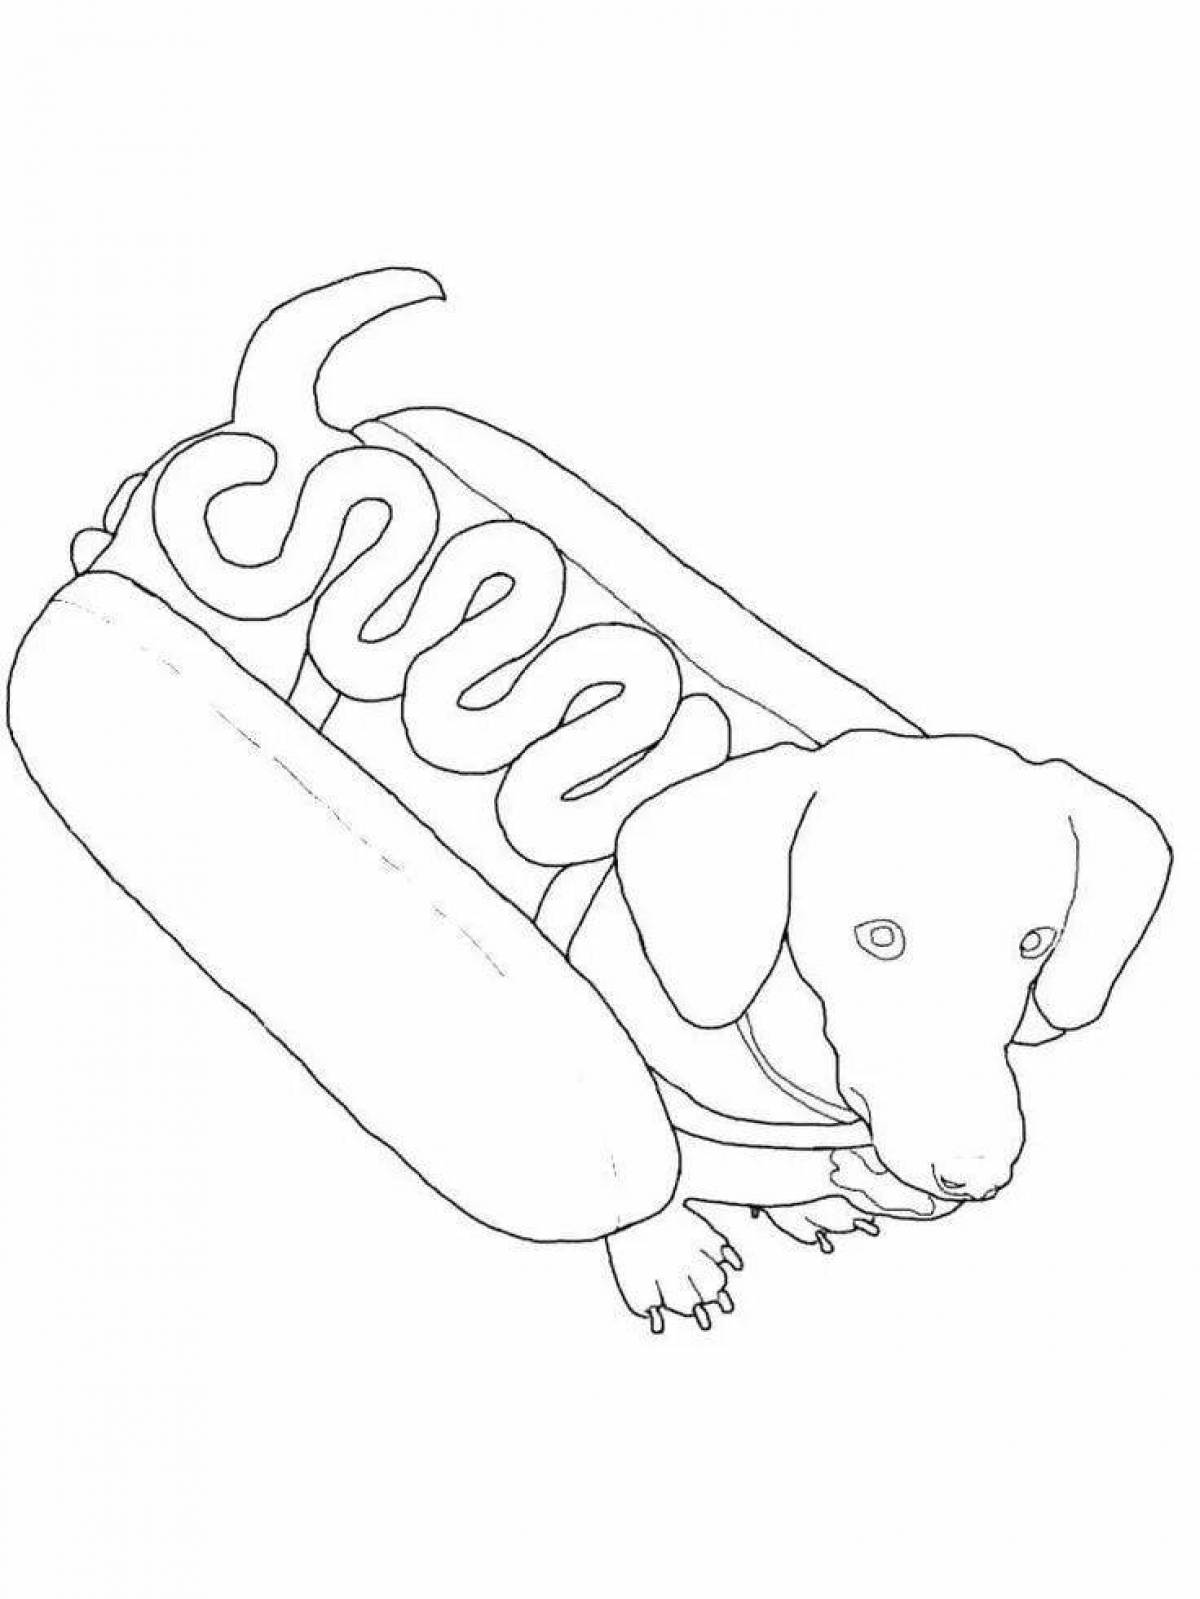 Adorable cardboard dog coloring page